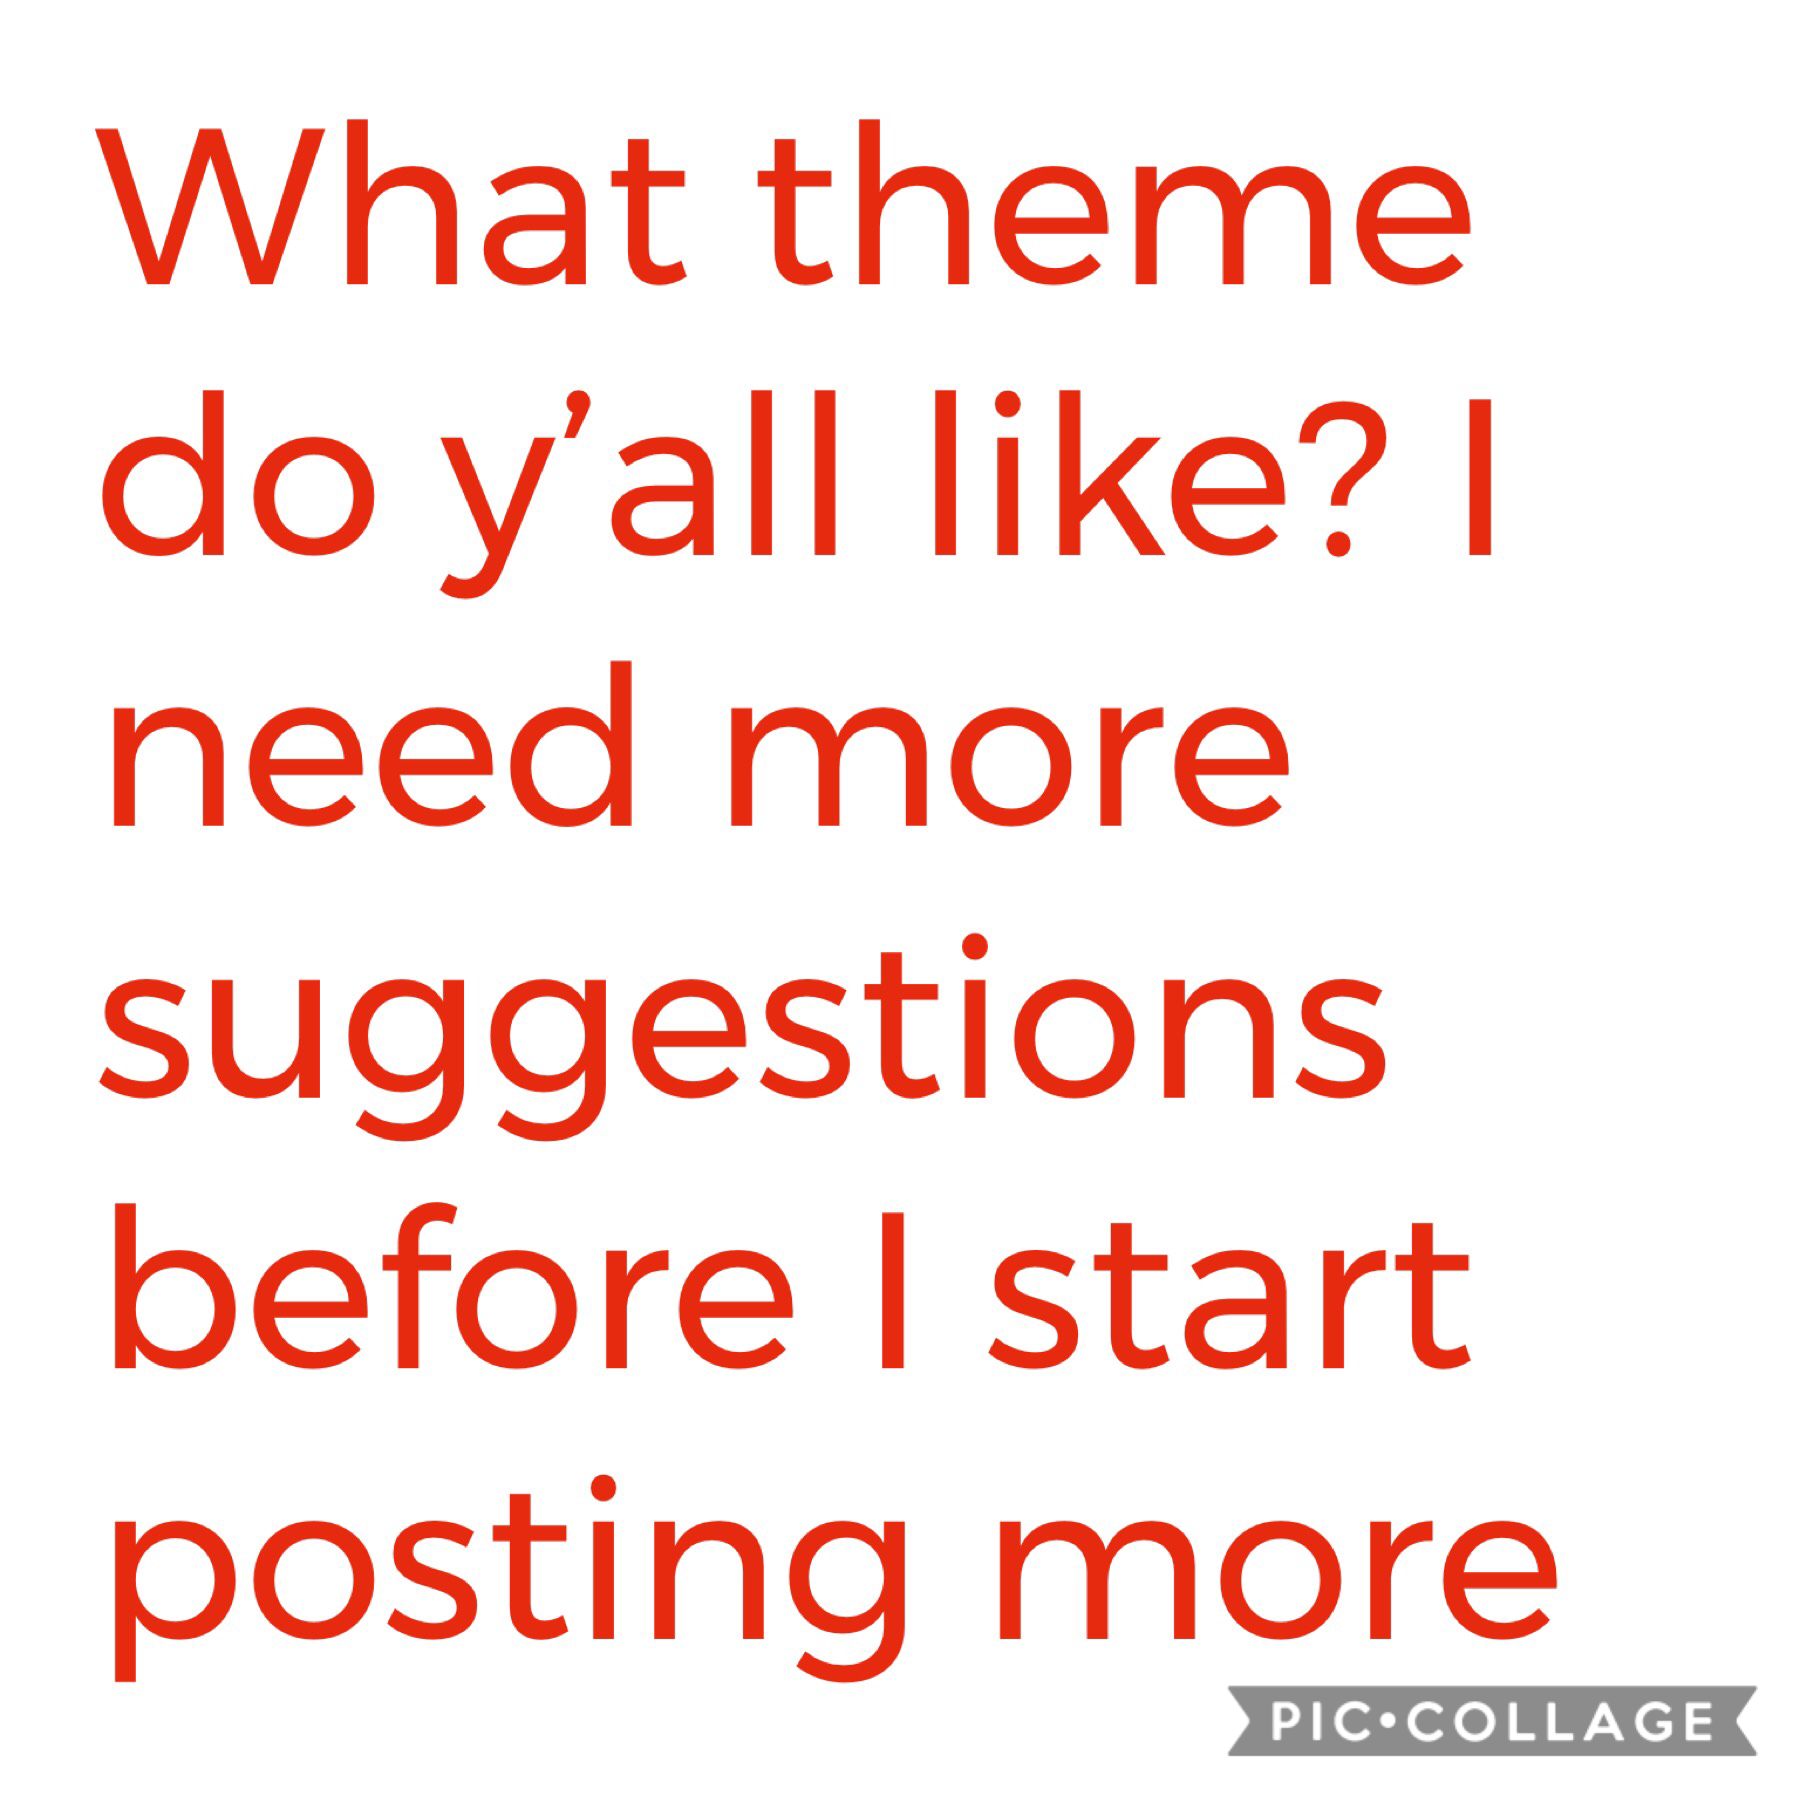 MORE SUGGESTIONS 